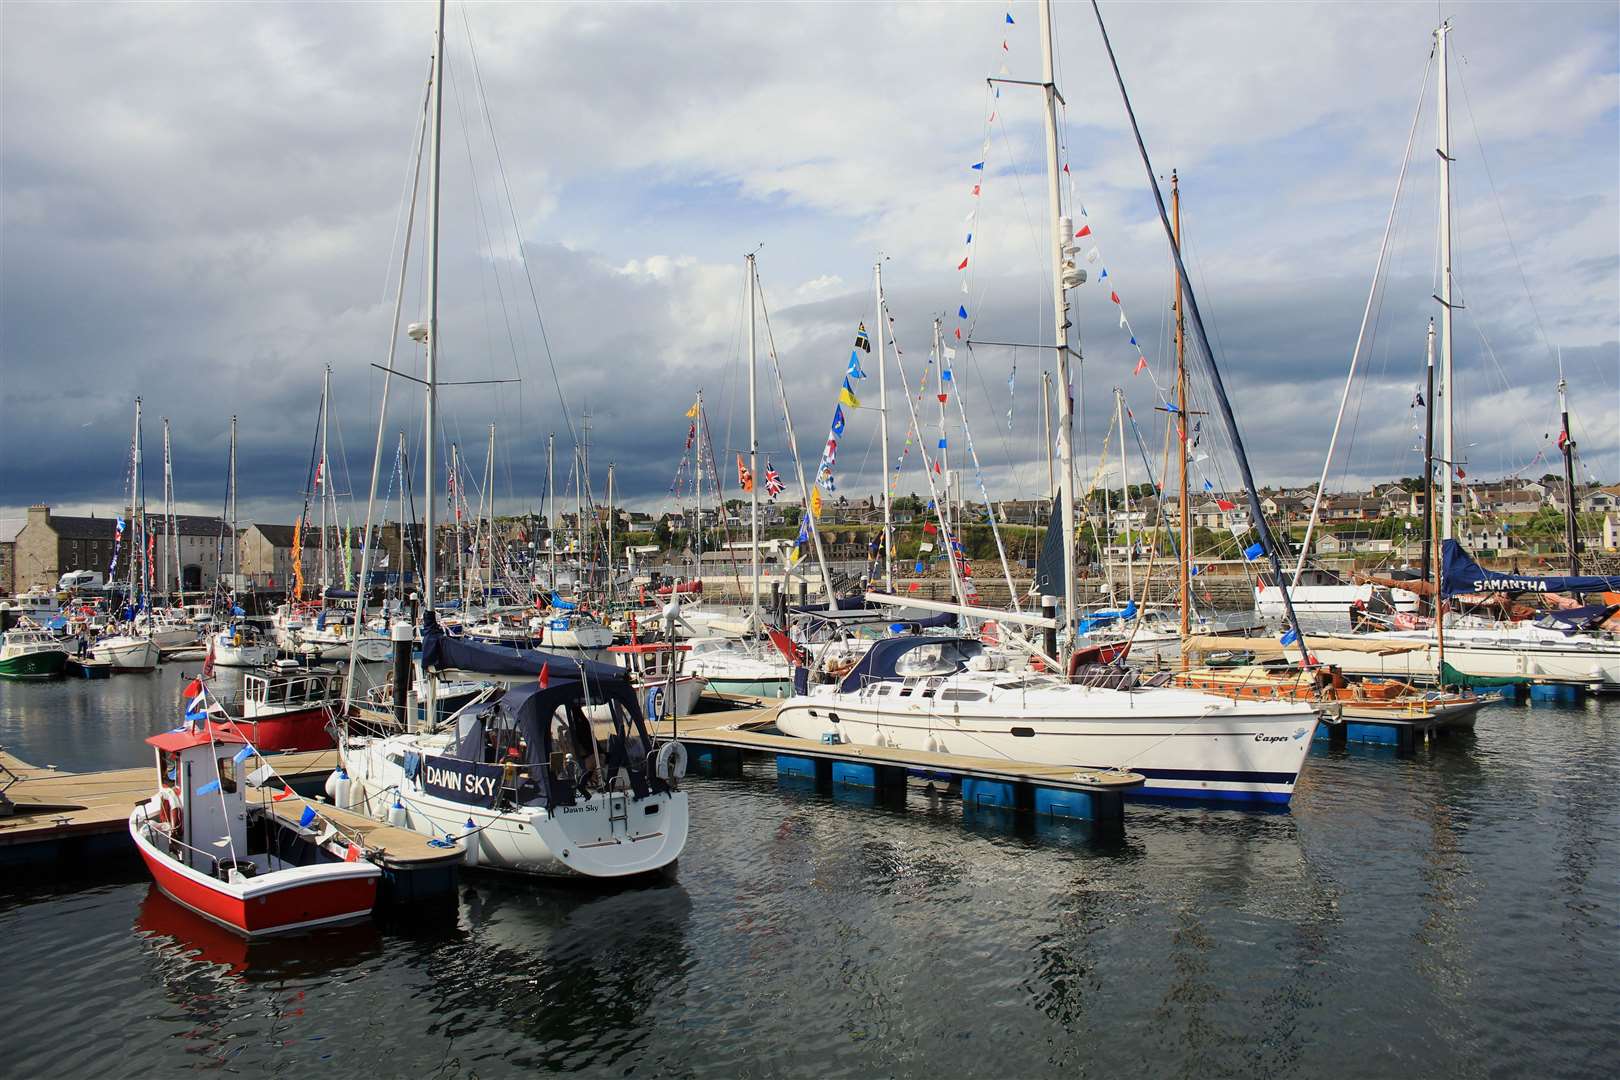 Wick's marina was a colourful sight on Harbour Day. Picture: Alan Hendry